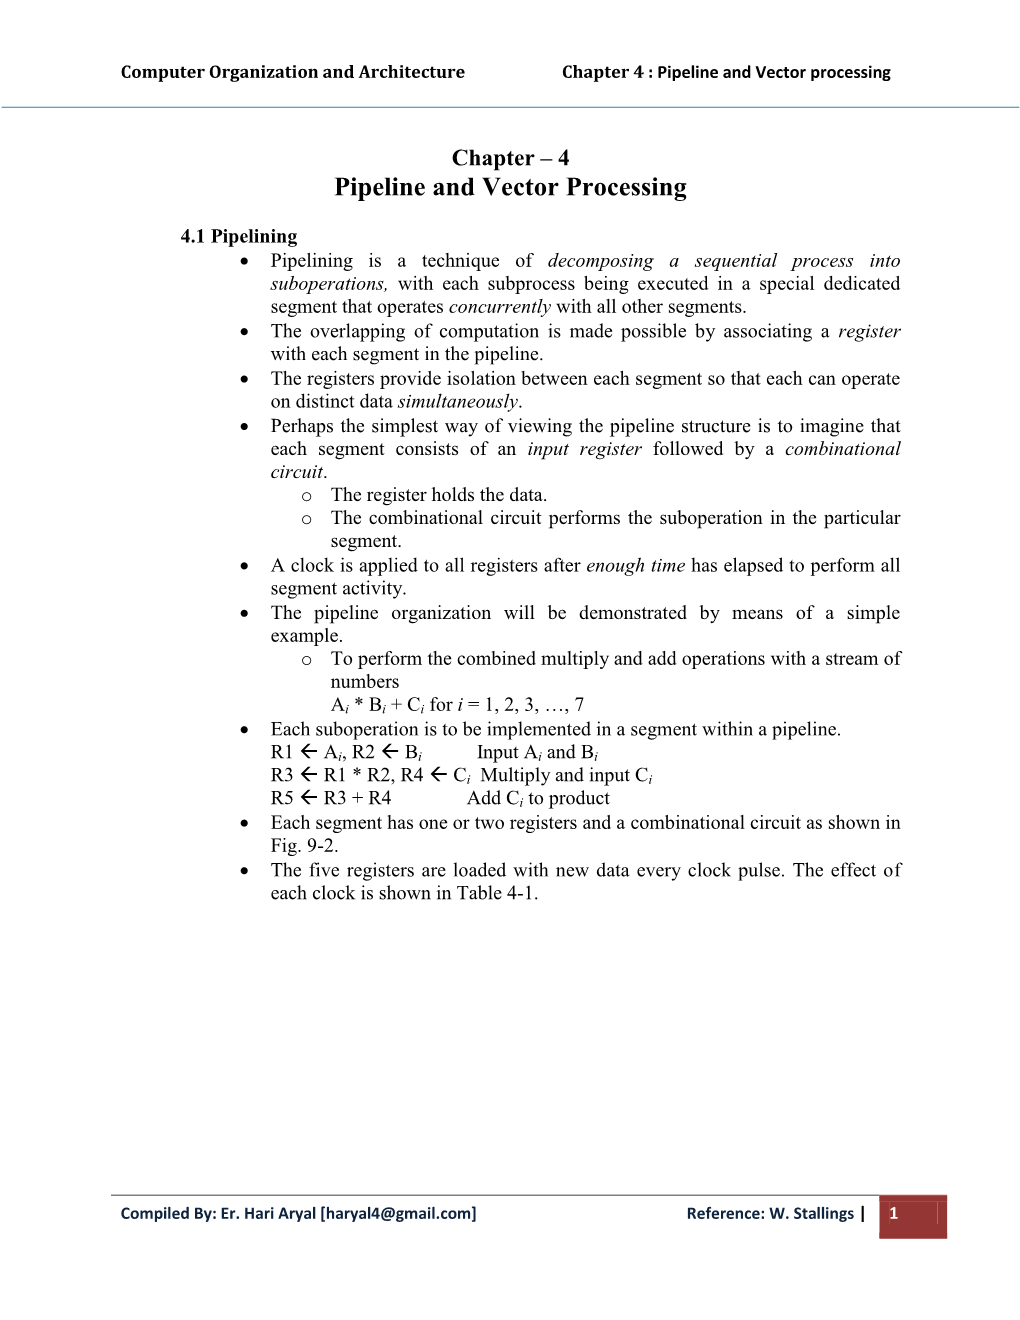 Pipeline and Vector Processing